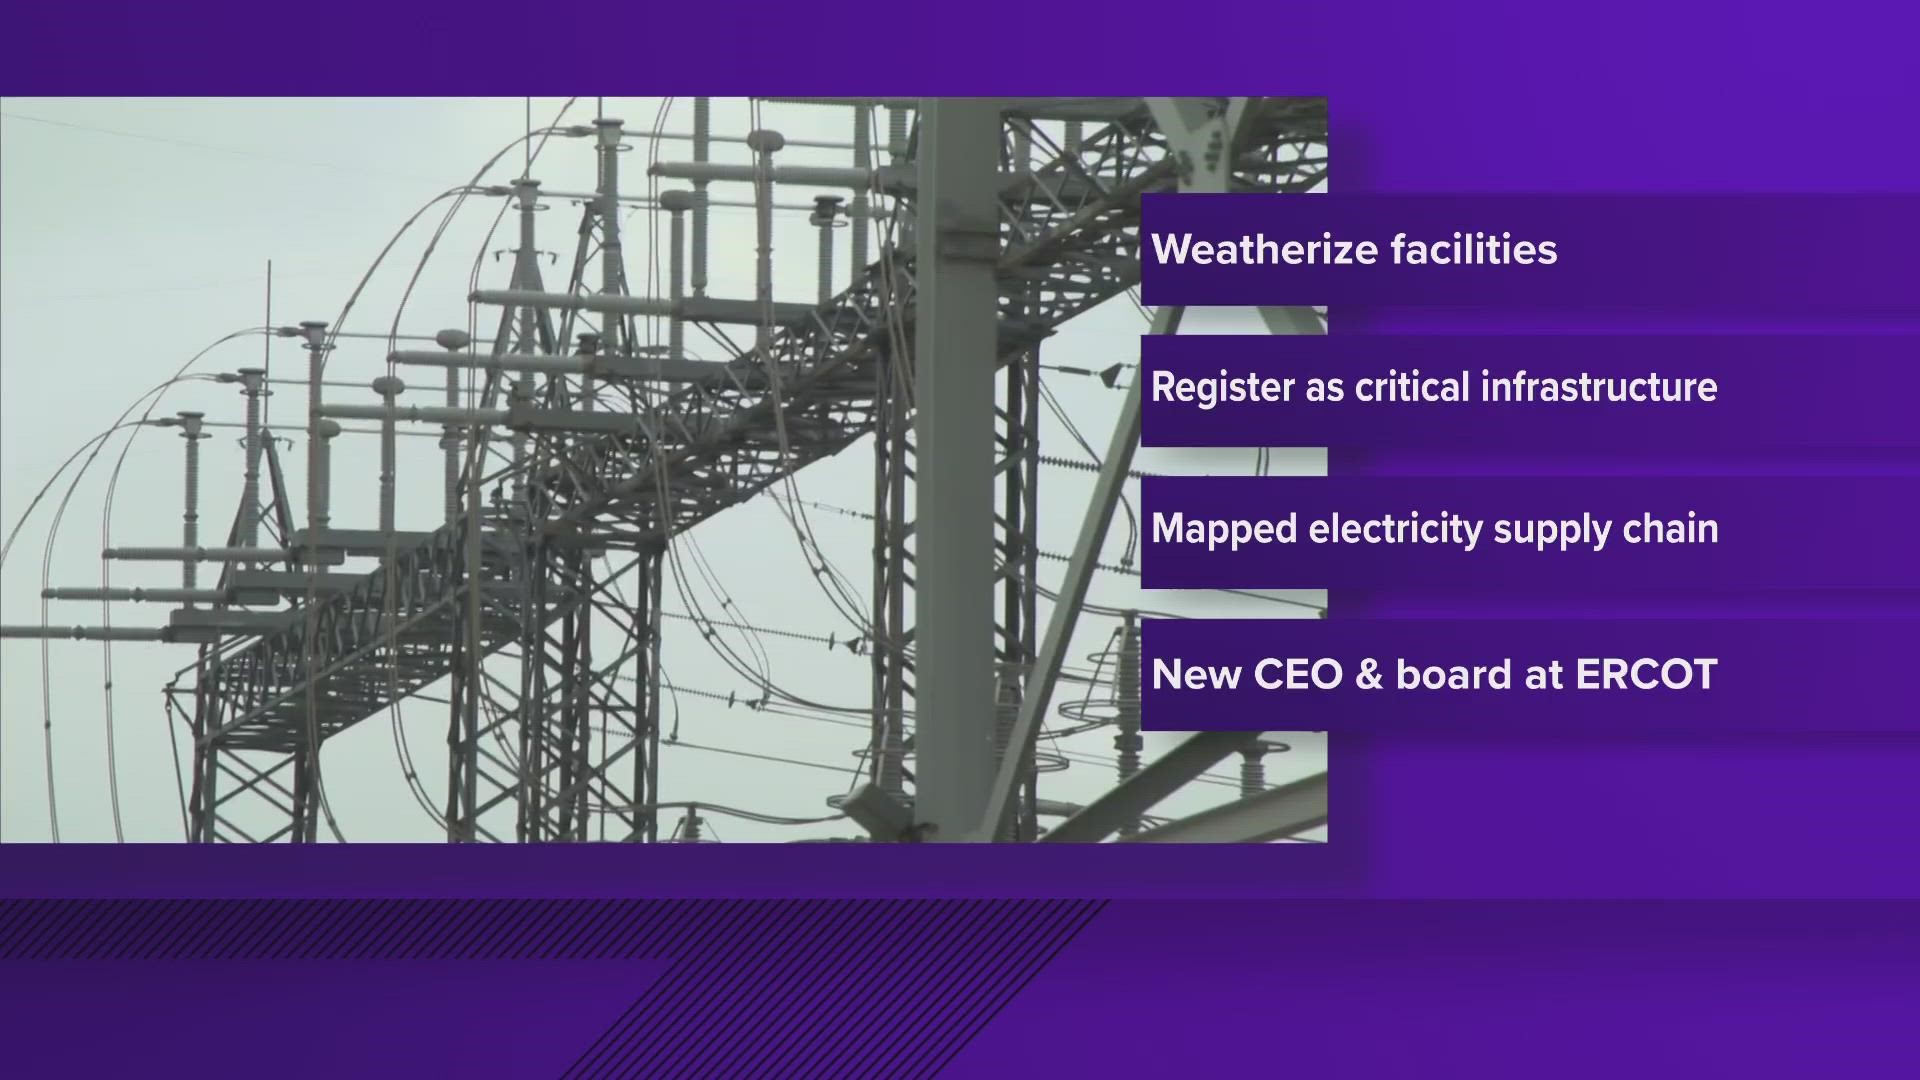 ERCOT says it made numerous enhancements to the power grid since the 2021 winter storm.